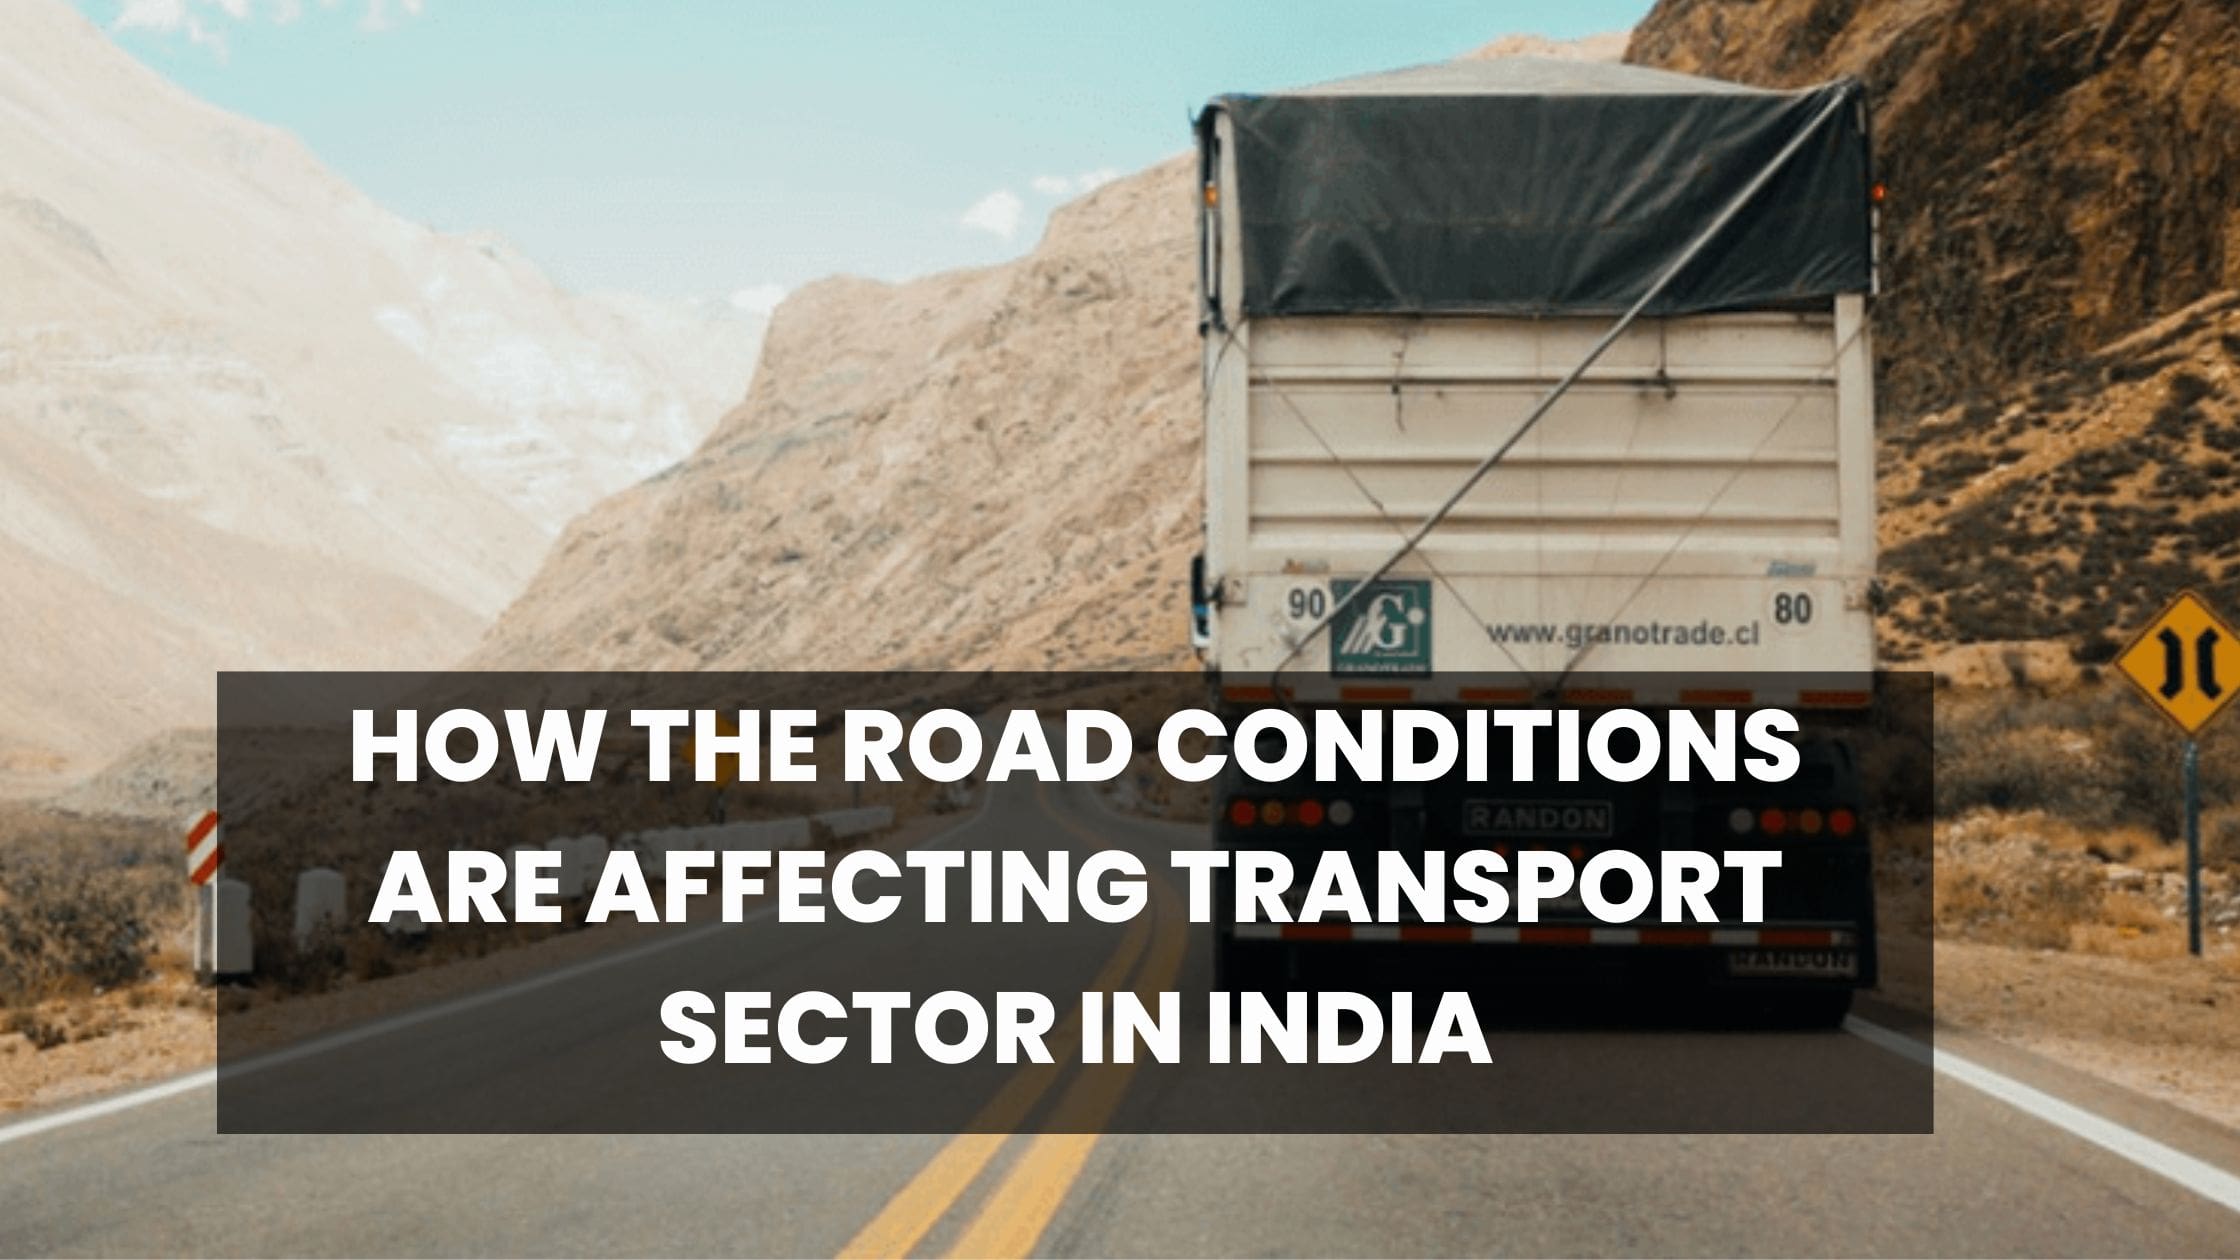 How The Road Conditions Are Affecting Transport Sector In India